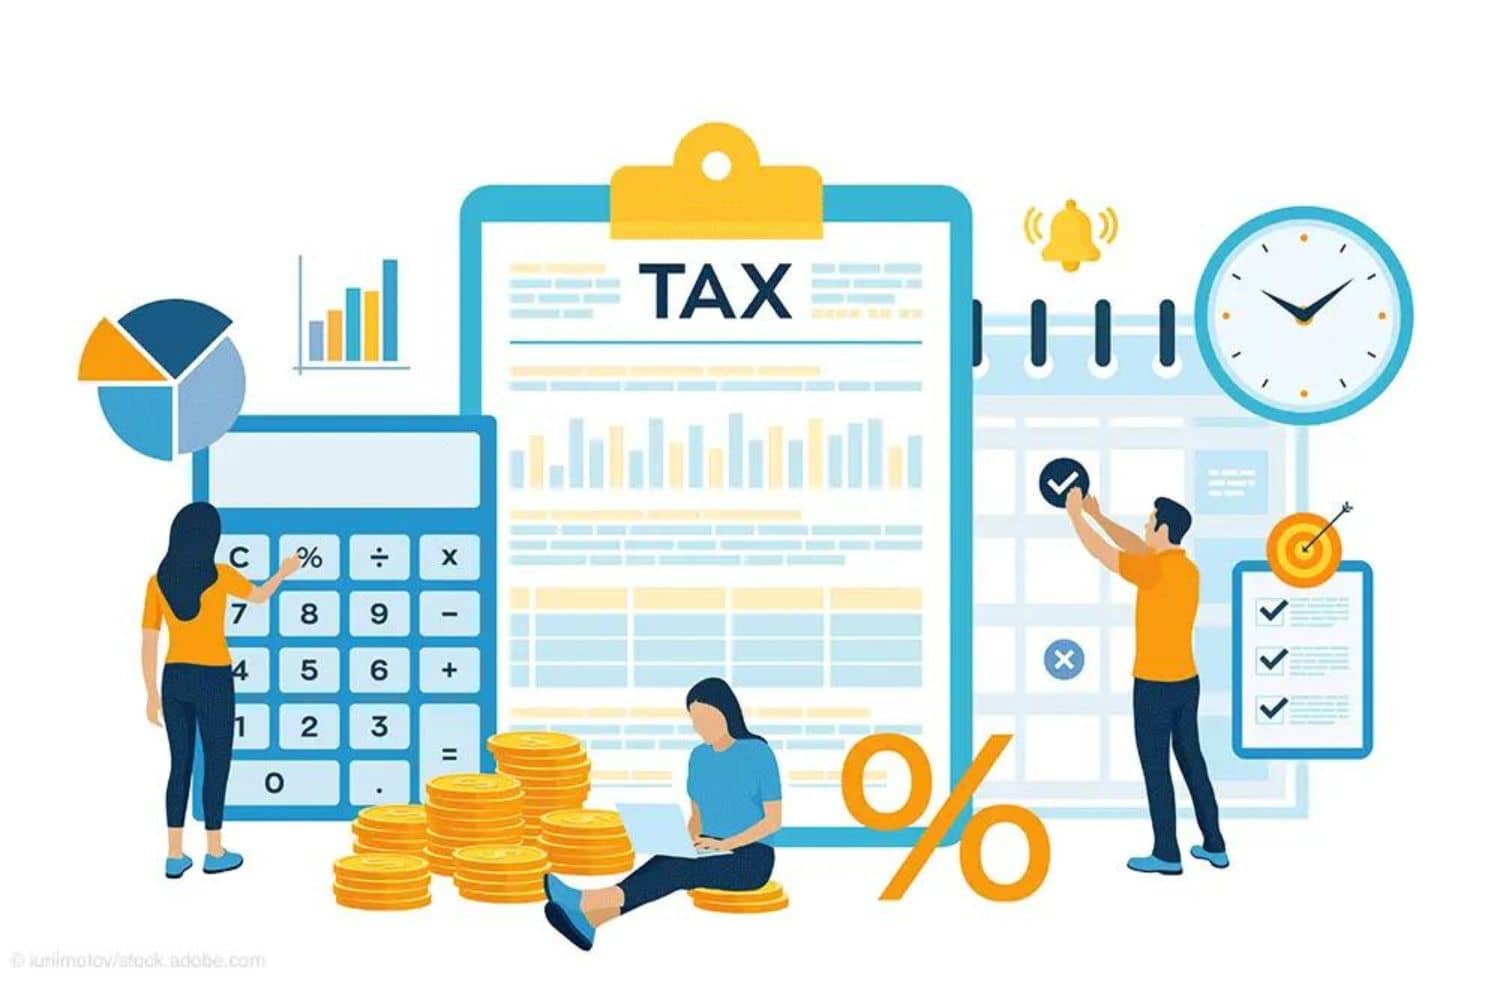 Representation to carry out enabling amendment to s.2(19AA) of Income-tax Act in definition of ‘demerger’ to facilitate hive off of business through divestment of shares of operating subsidiary